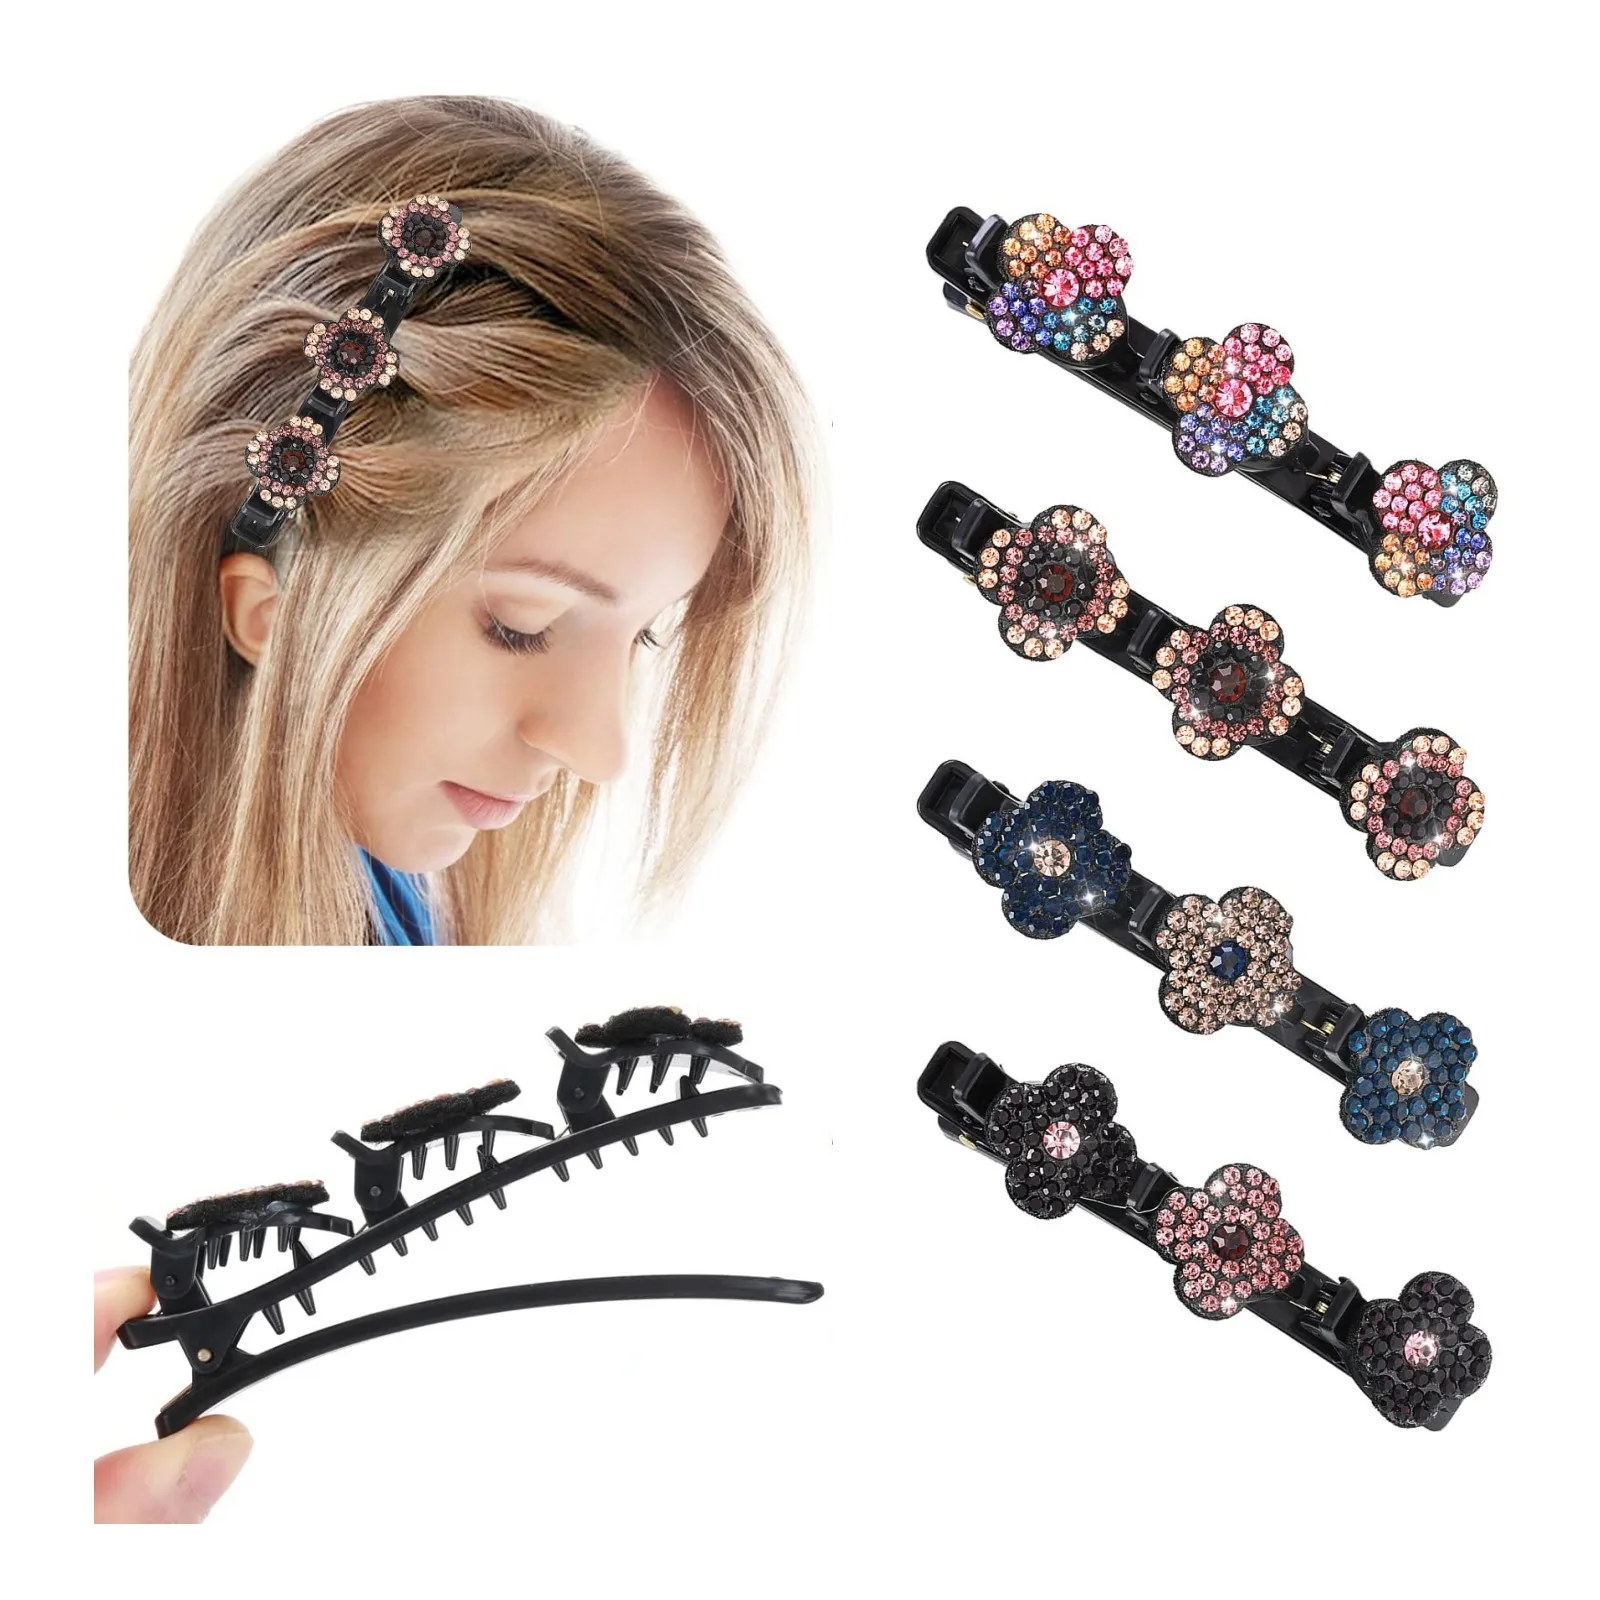 

Braided Hair Clips with Sparkling Crystal Stone for Girls and Women Hair Styling Rhinestones Barrettes for Thick Hair